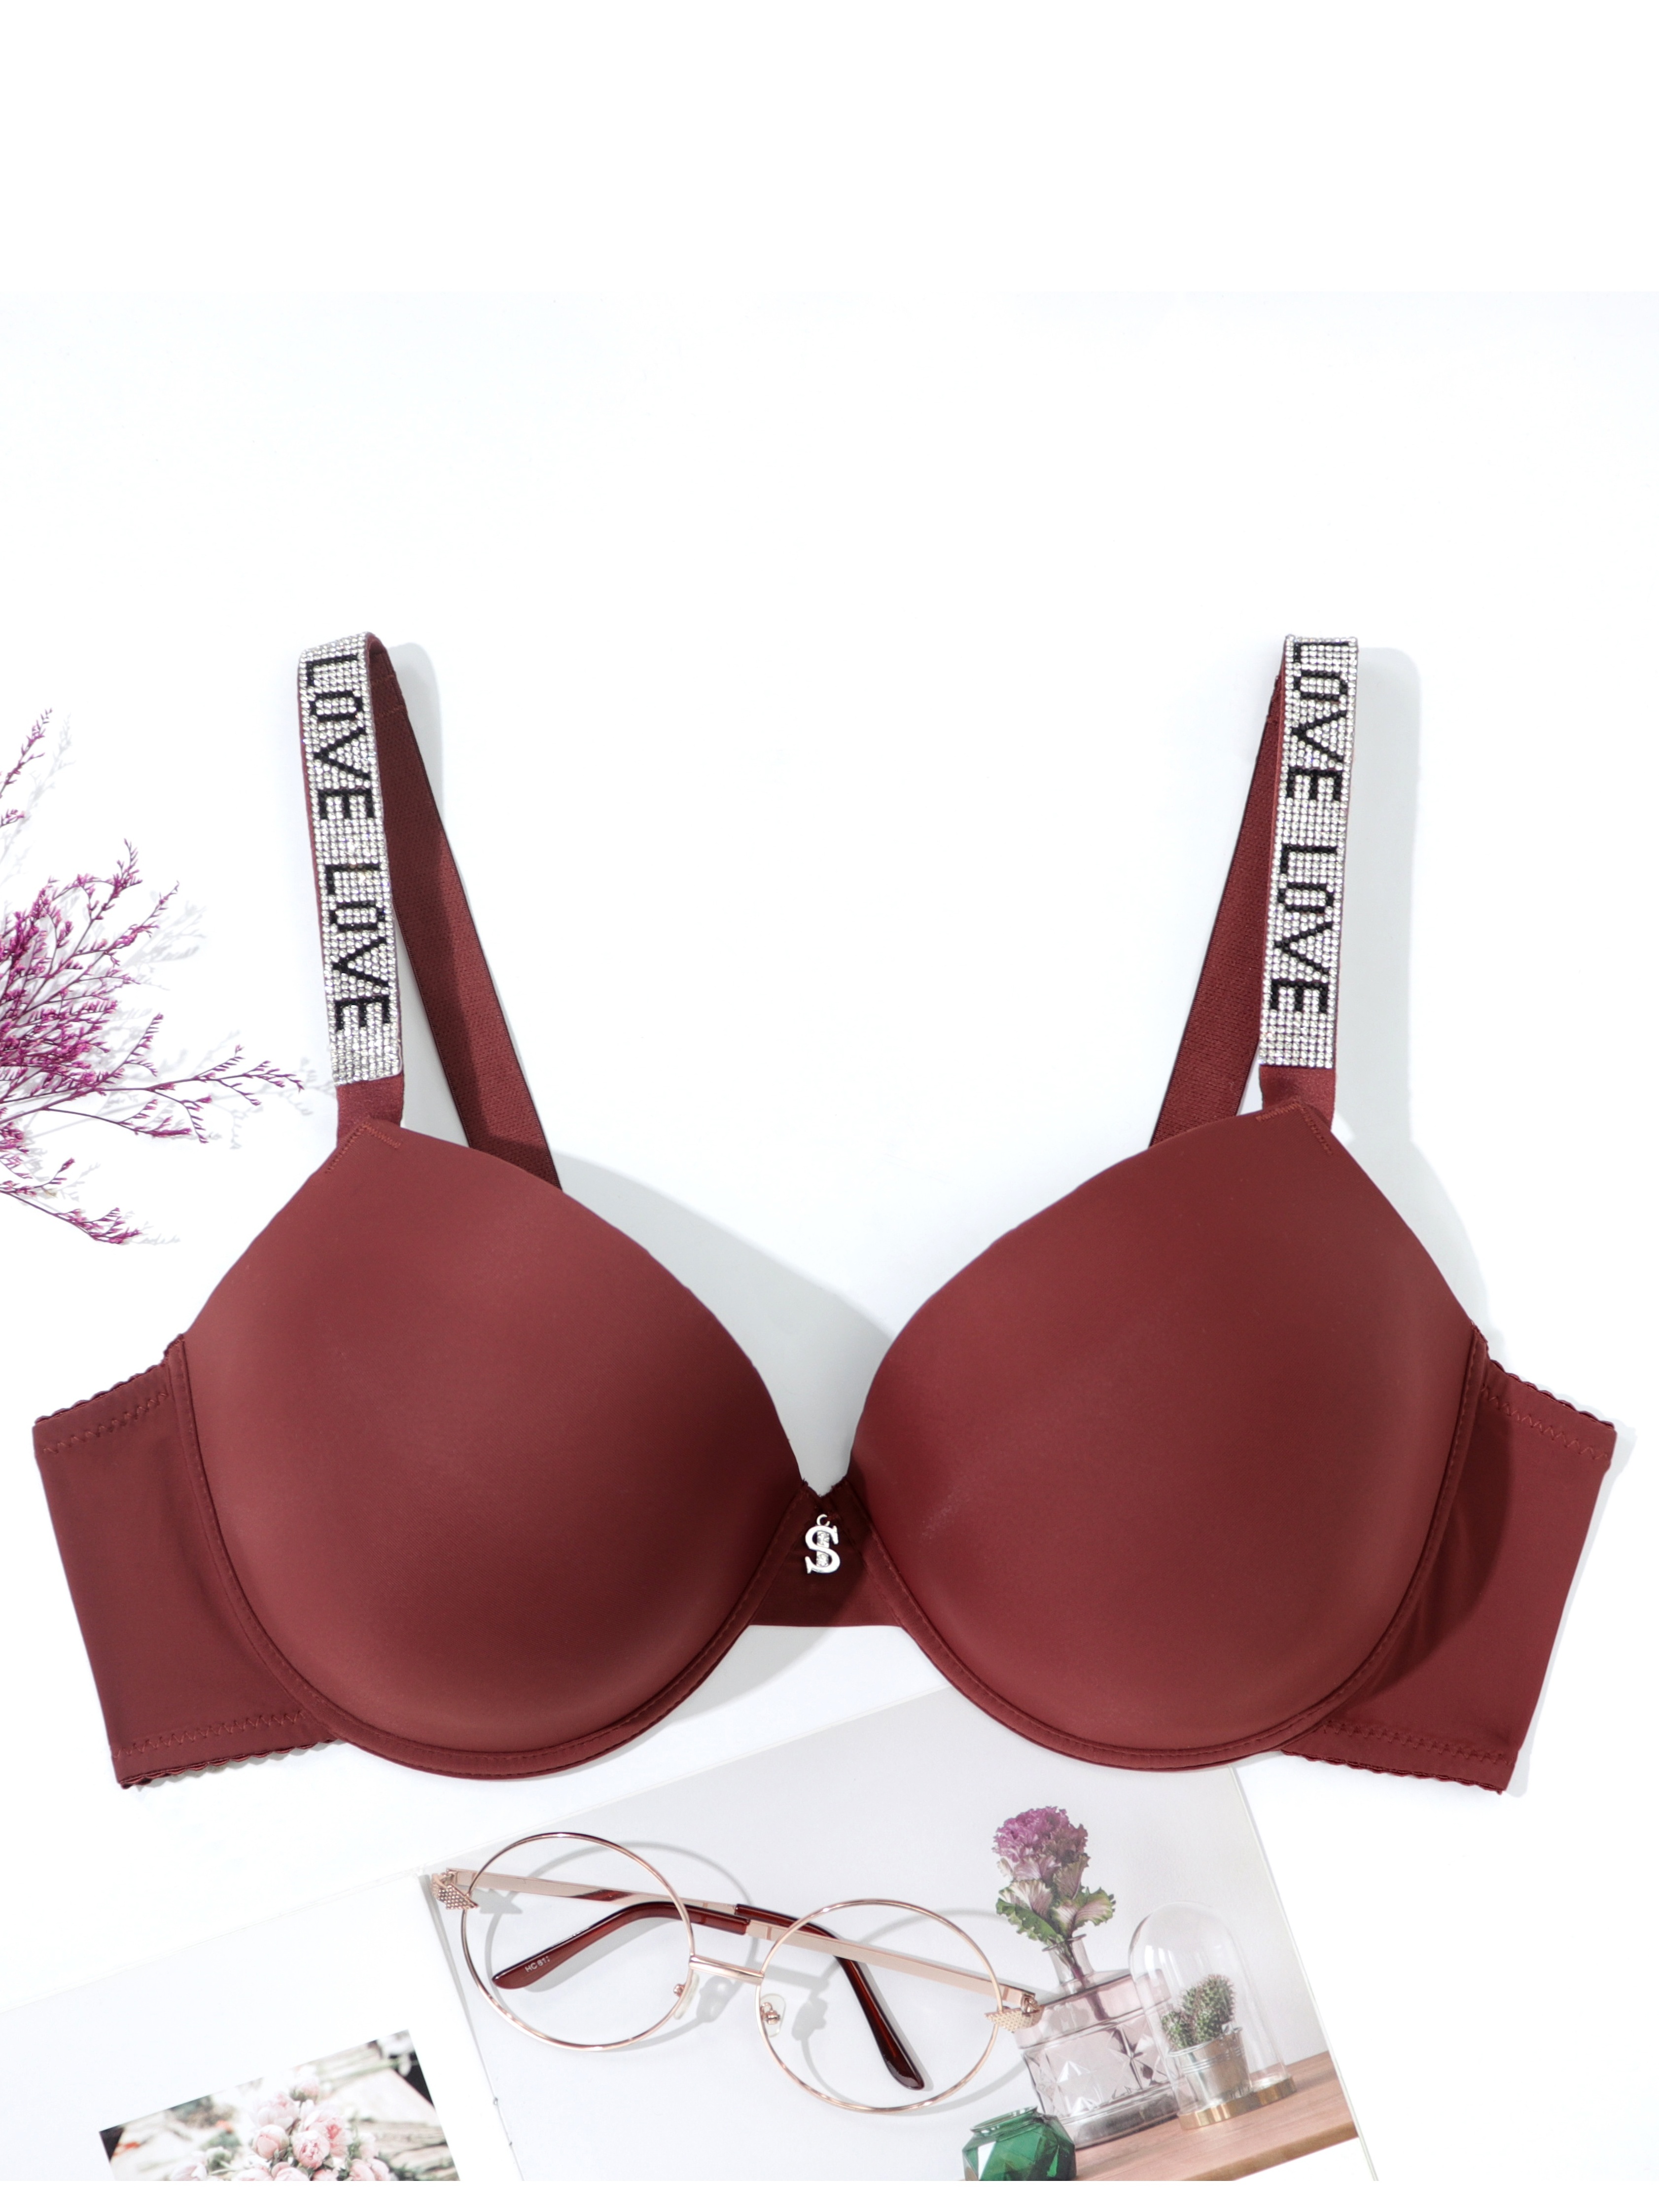 Zippered Molded Cup Bra | Robbins Instruments